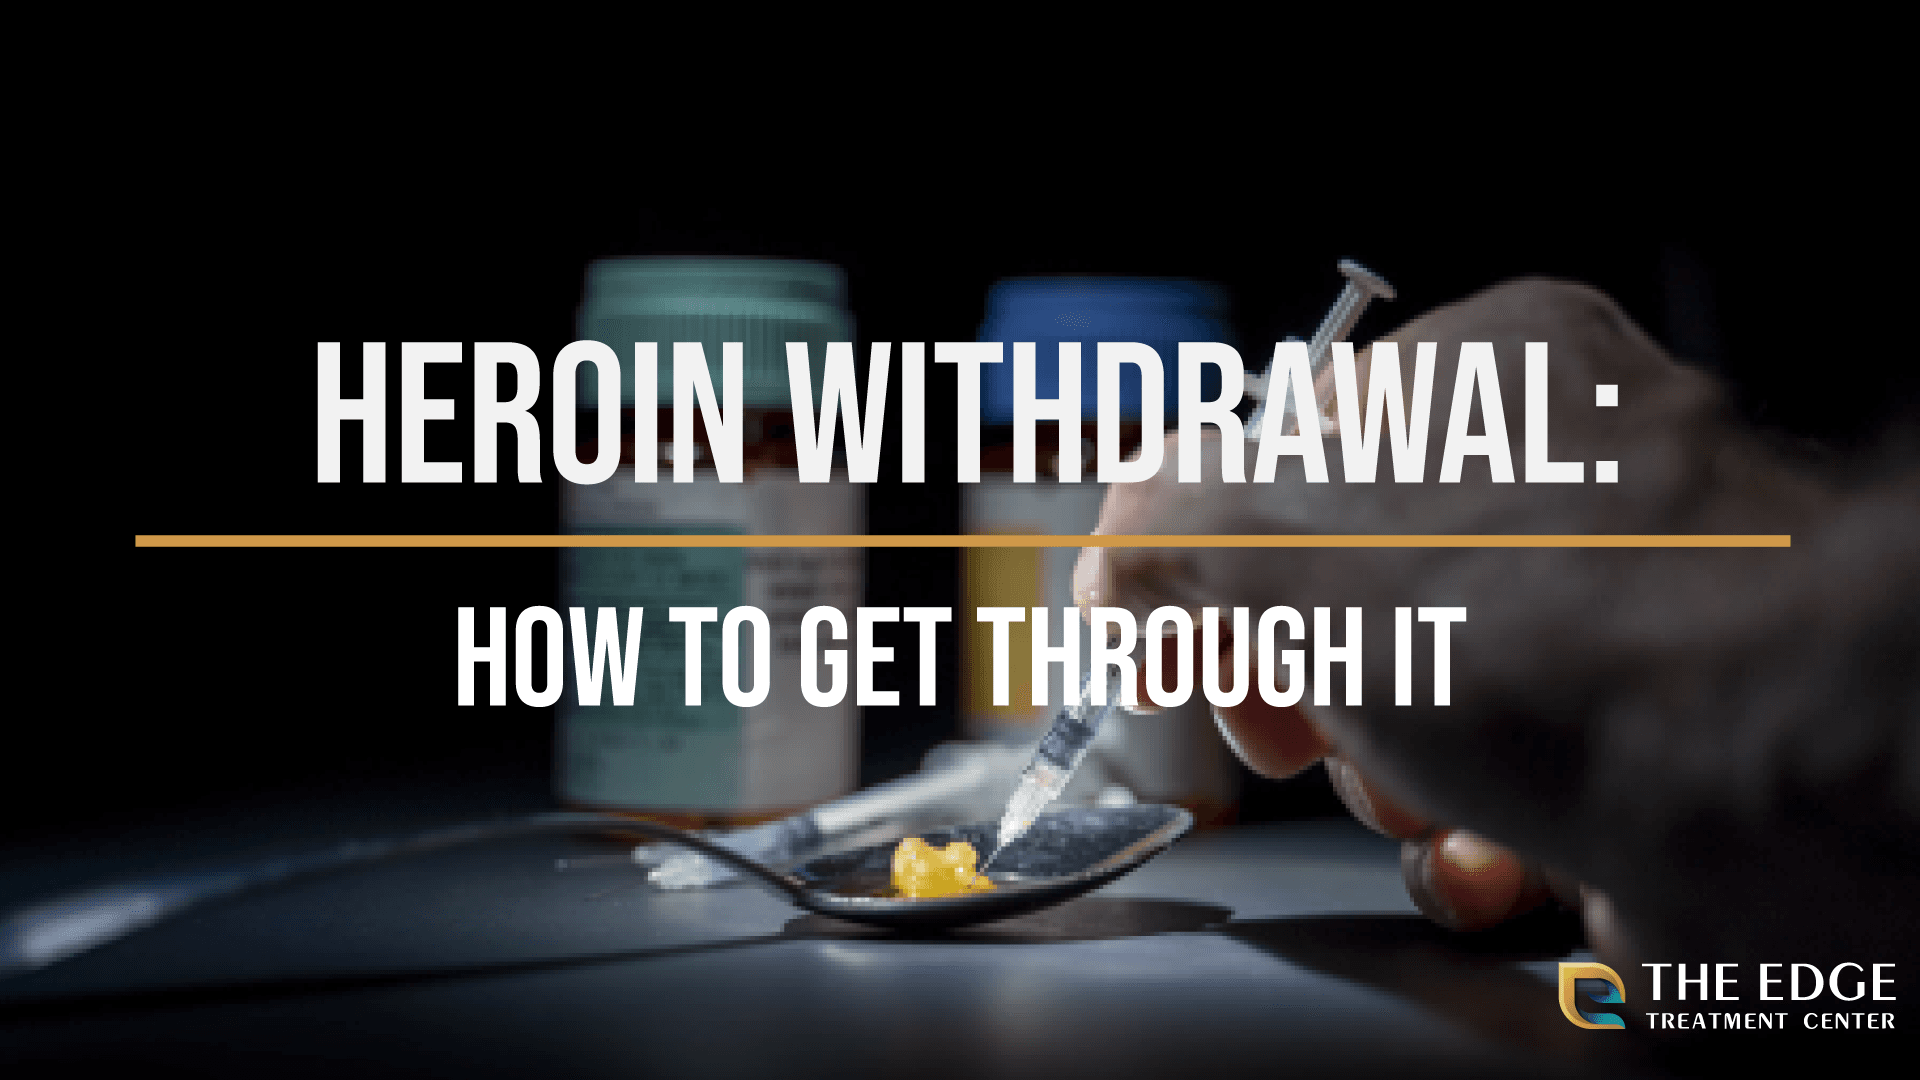 What is heroin withdrawal?